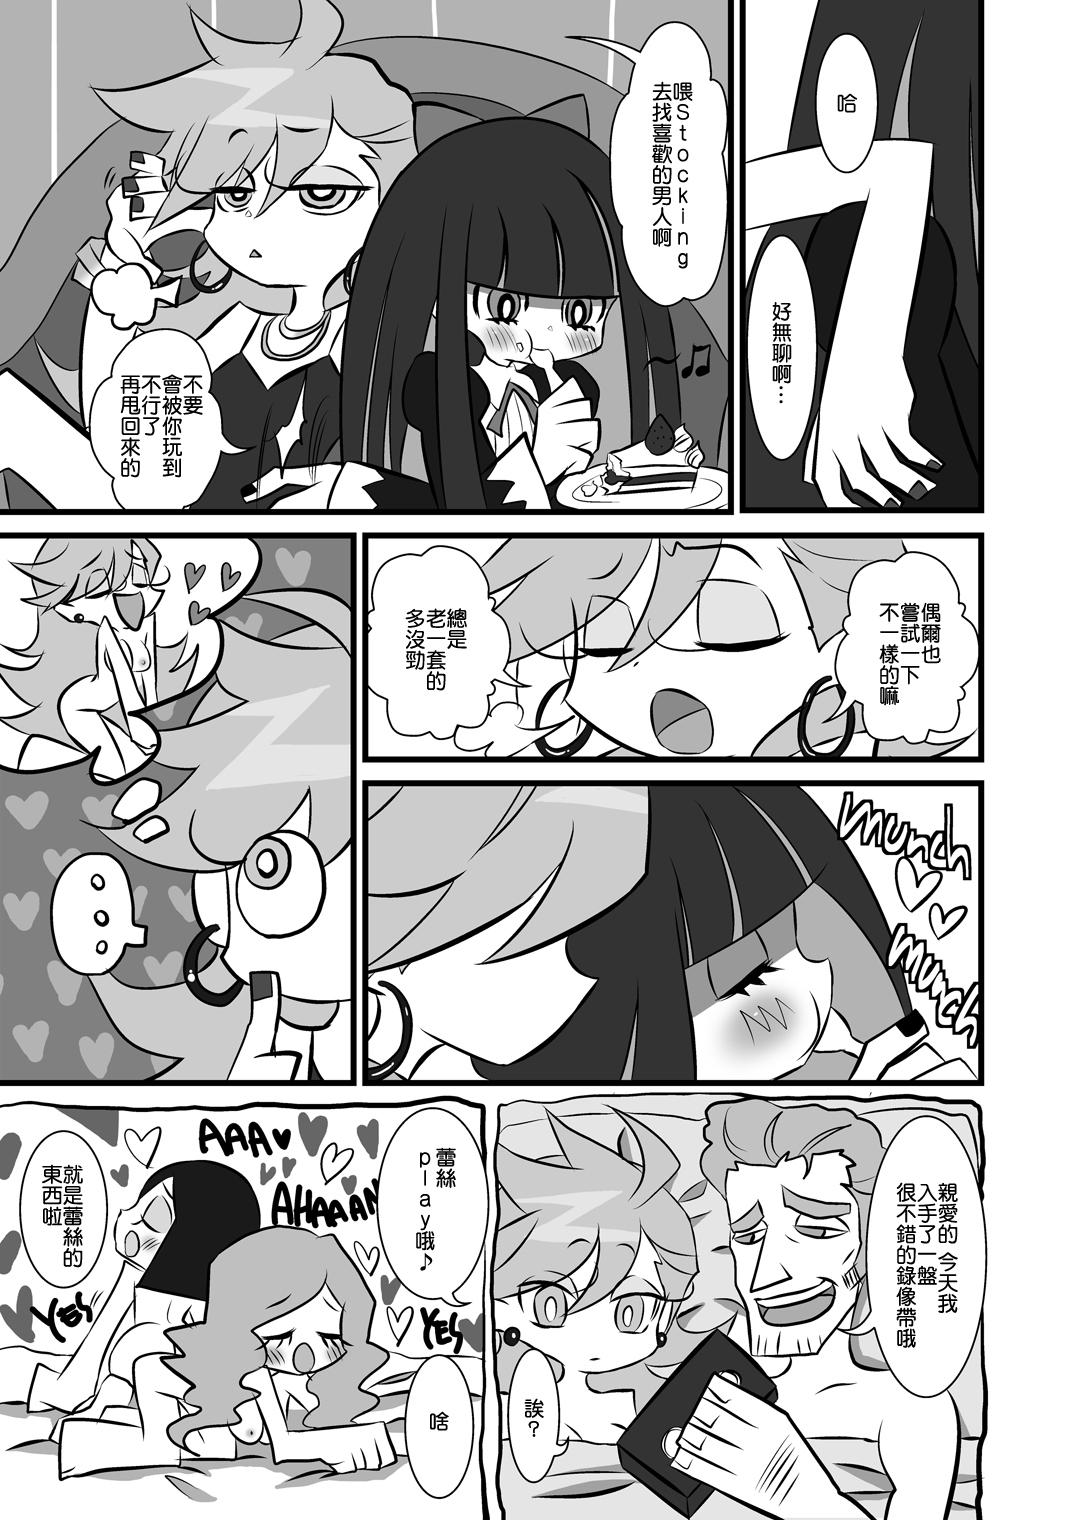 Cougars Chu Chu Les Play - lesbian play - Panty and stocking with garterbelt Piss - Page 5